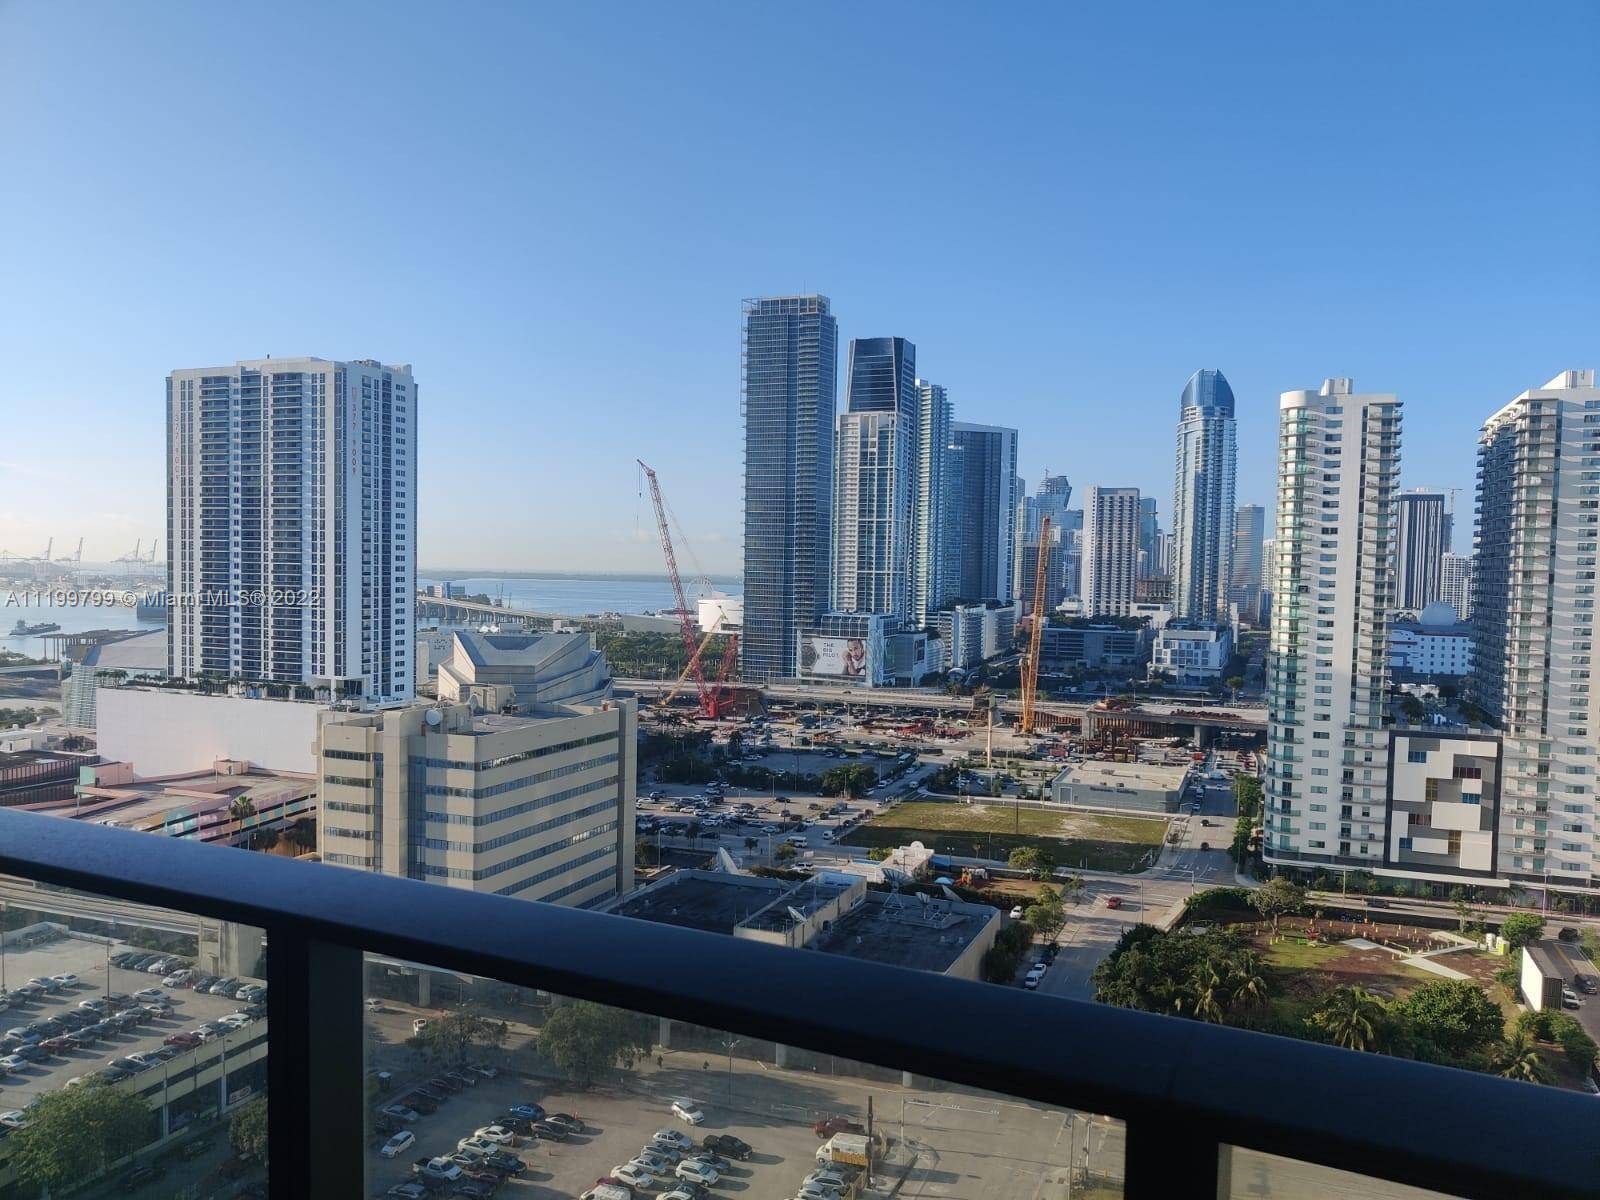 2 bed 2 bath floor plan with amazing bay and city views, large balcony.